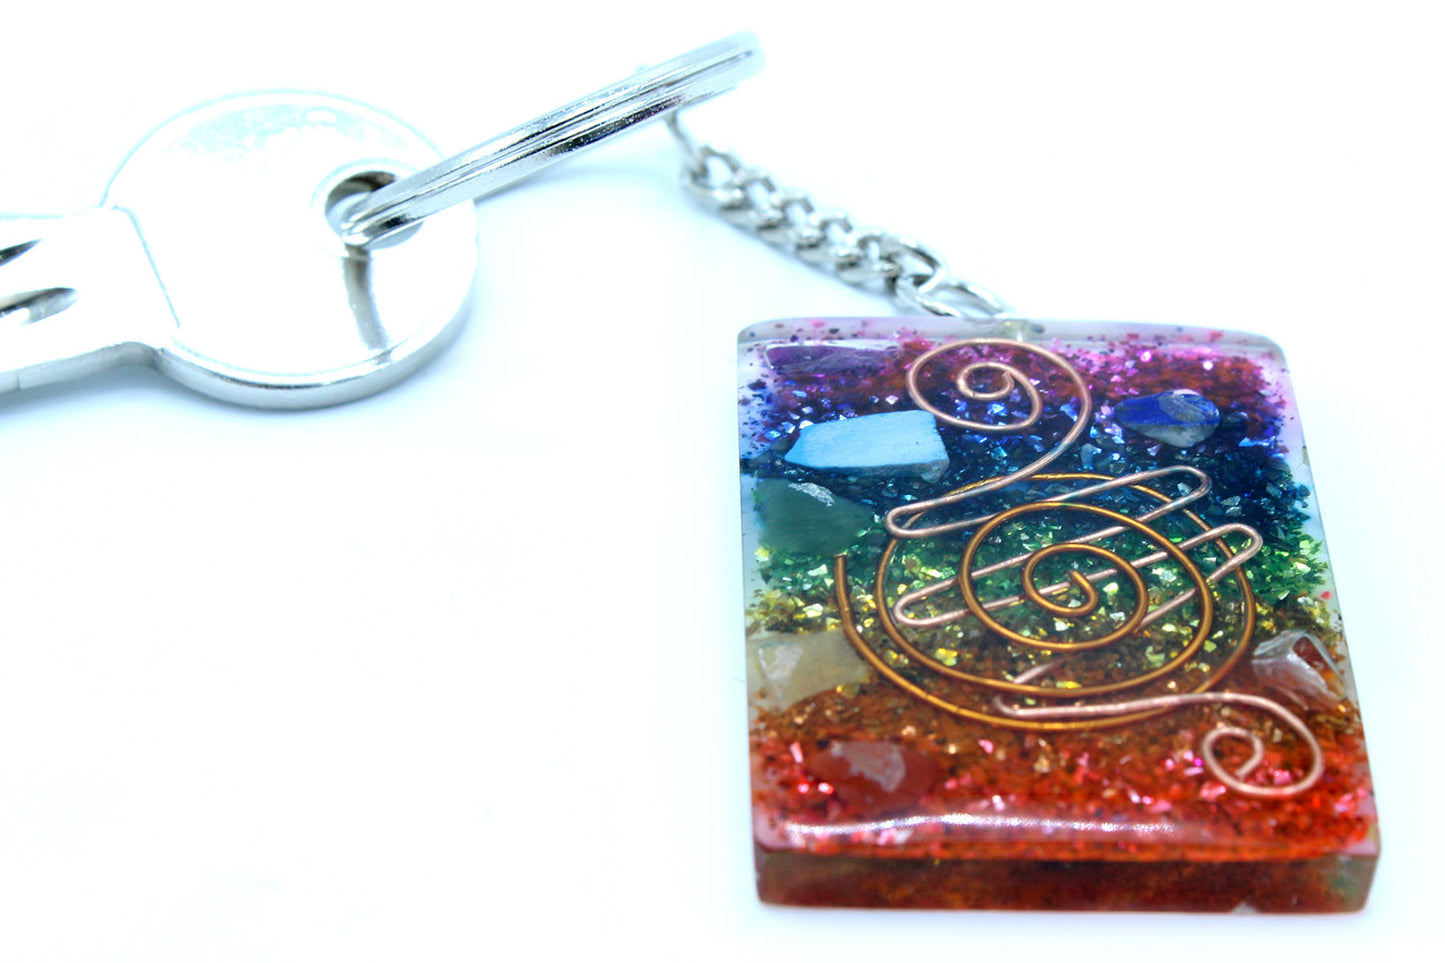 Orgonite Power Keyring - Home Protect Copper and Chakra (Rainbow Effect)